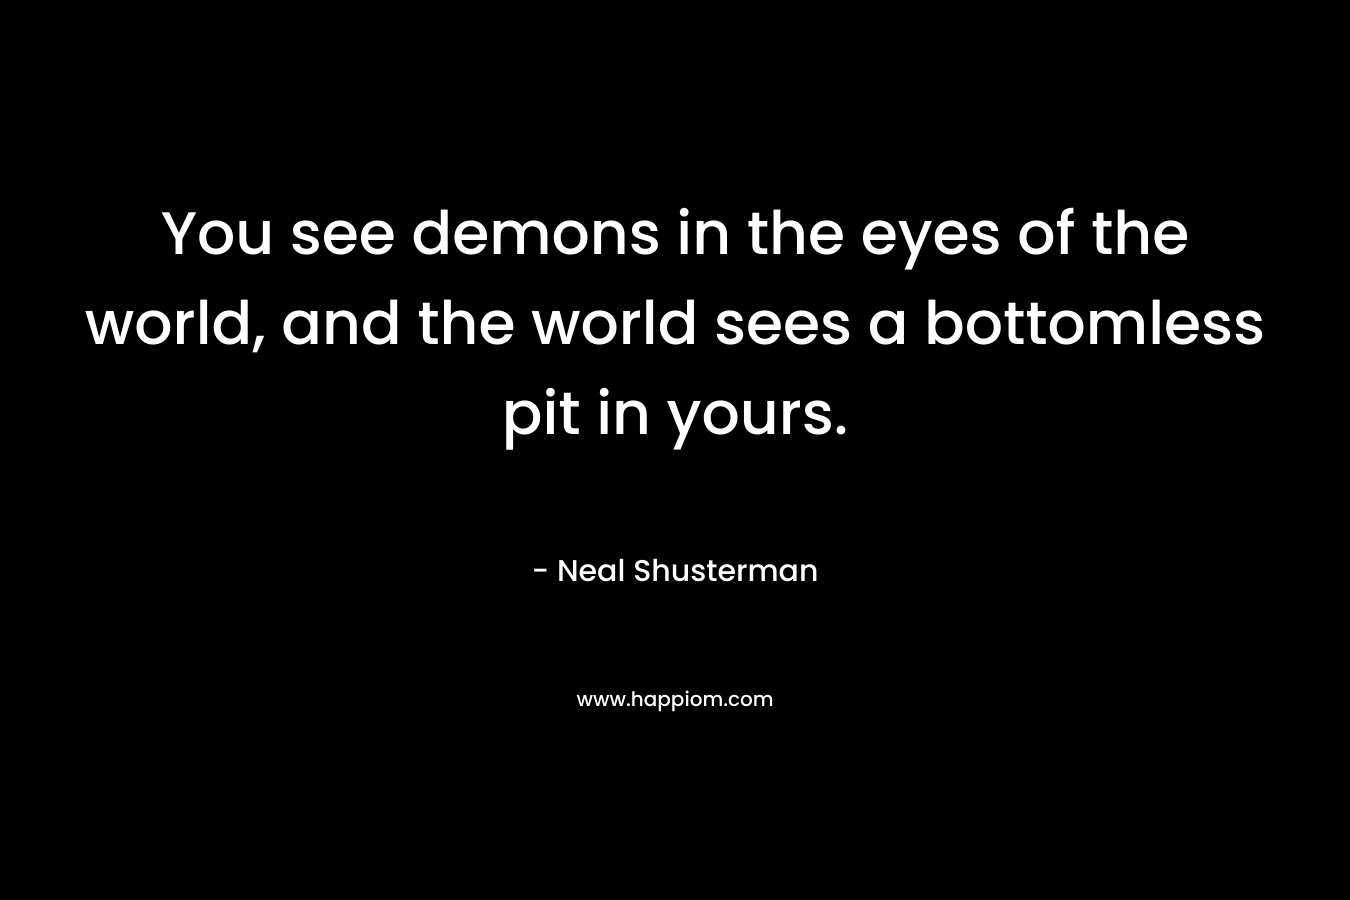 You see demons in the eyes of the world, and the world sees a bottomless pit in yours.